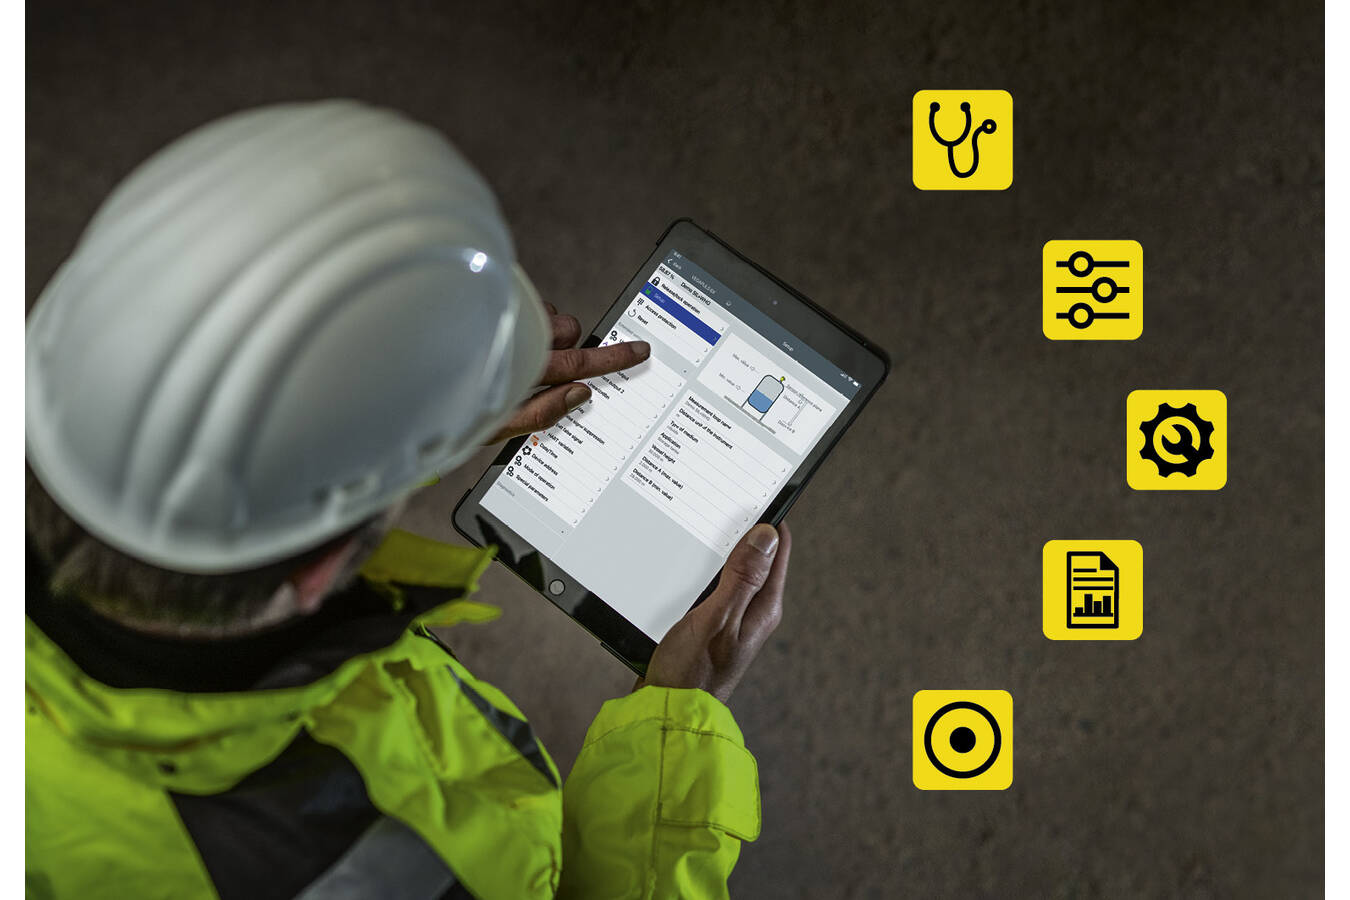 Setup and commissioning, diagnosis or quick access to important instrument documents: The VEGA Tools app makes everyday work easier.